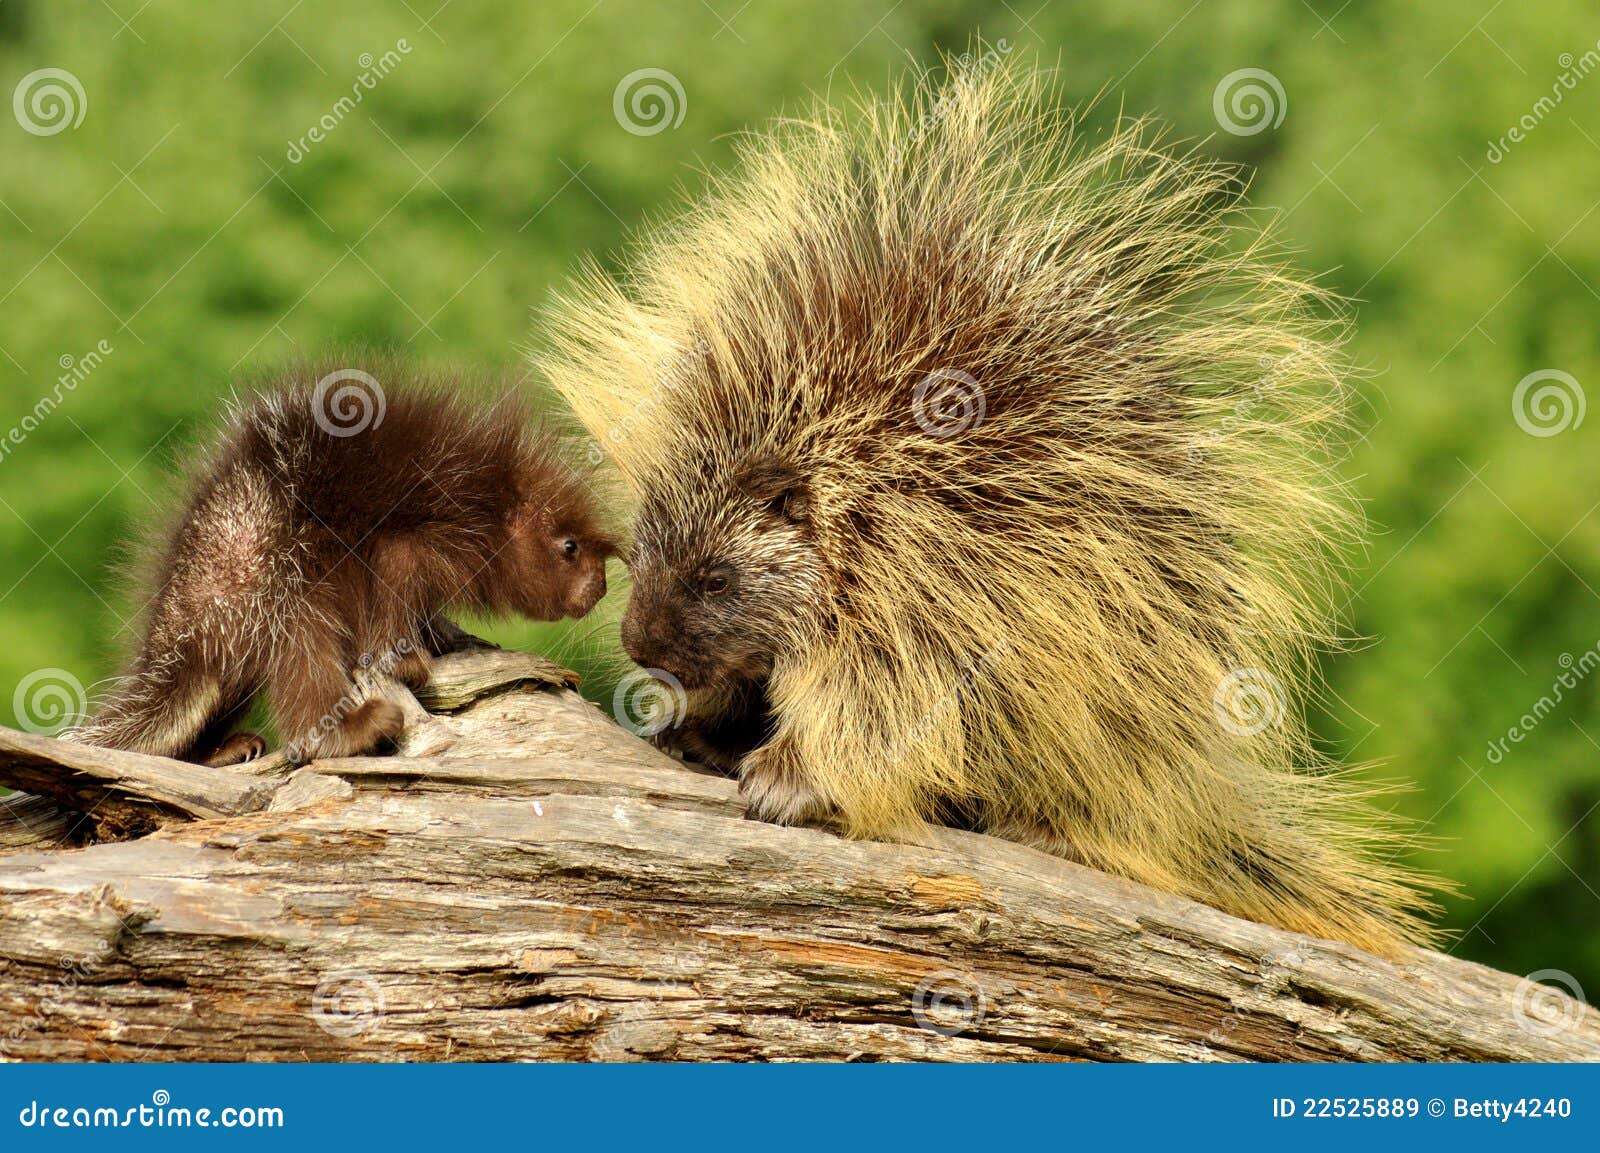 mother porcupine and her baby